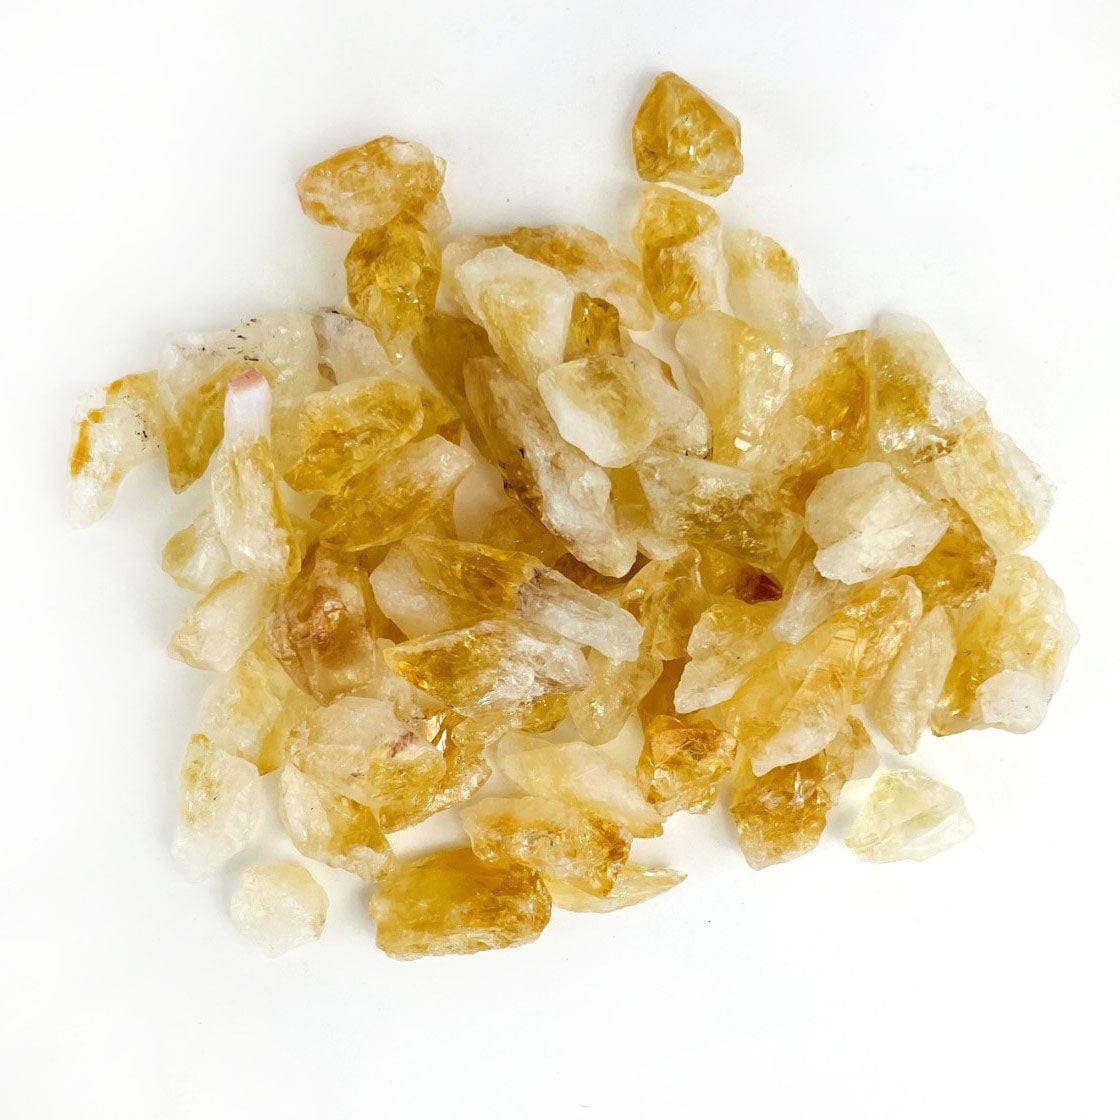 Citrine Stones - Golden Amethyst in a pile, approximately 150 grams, 1 bag